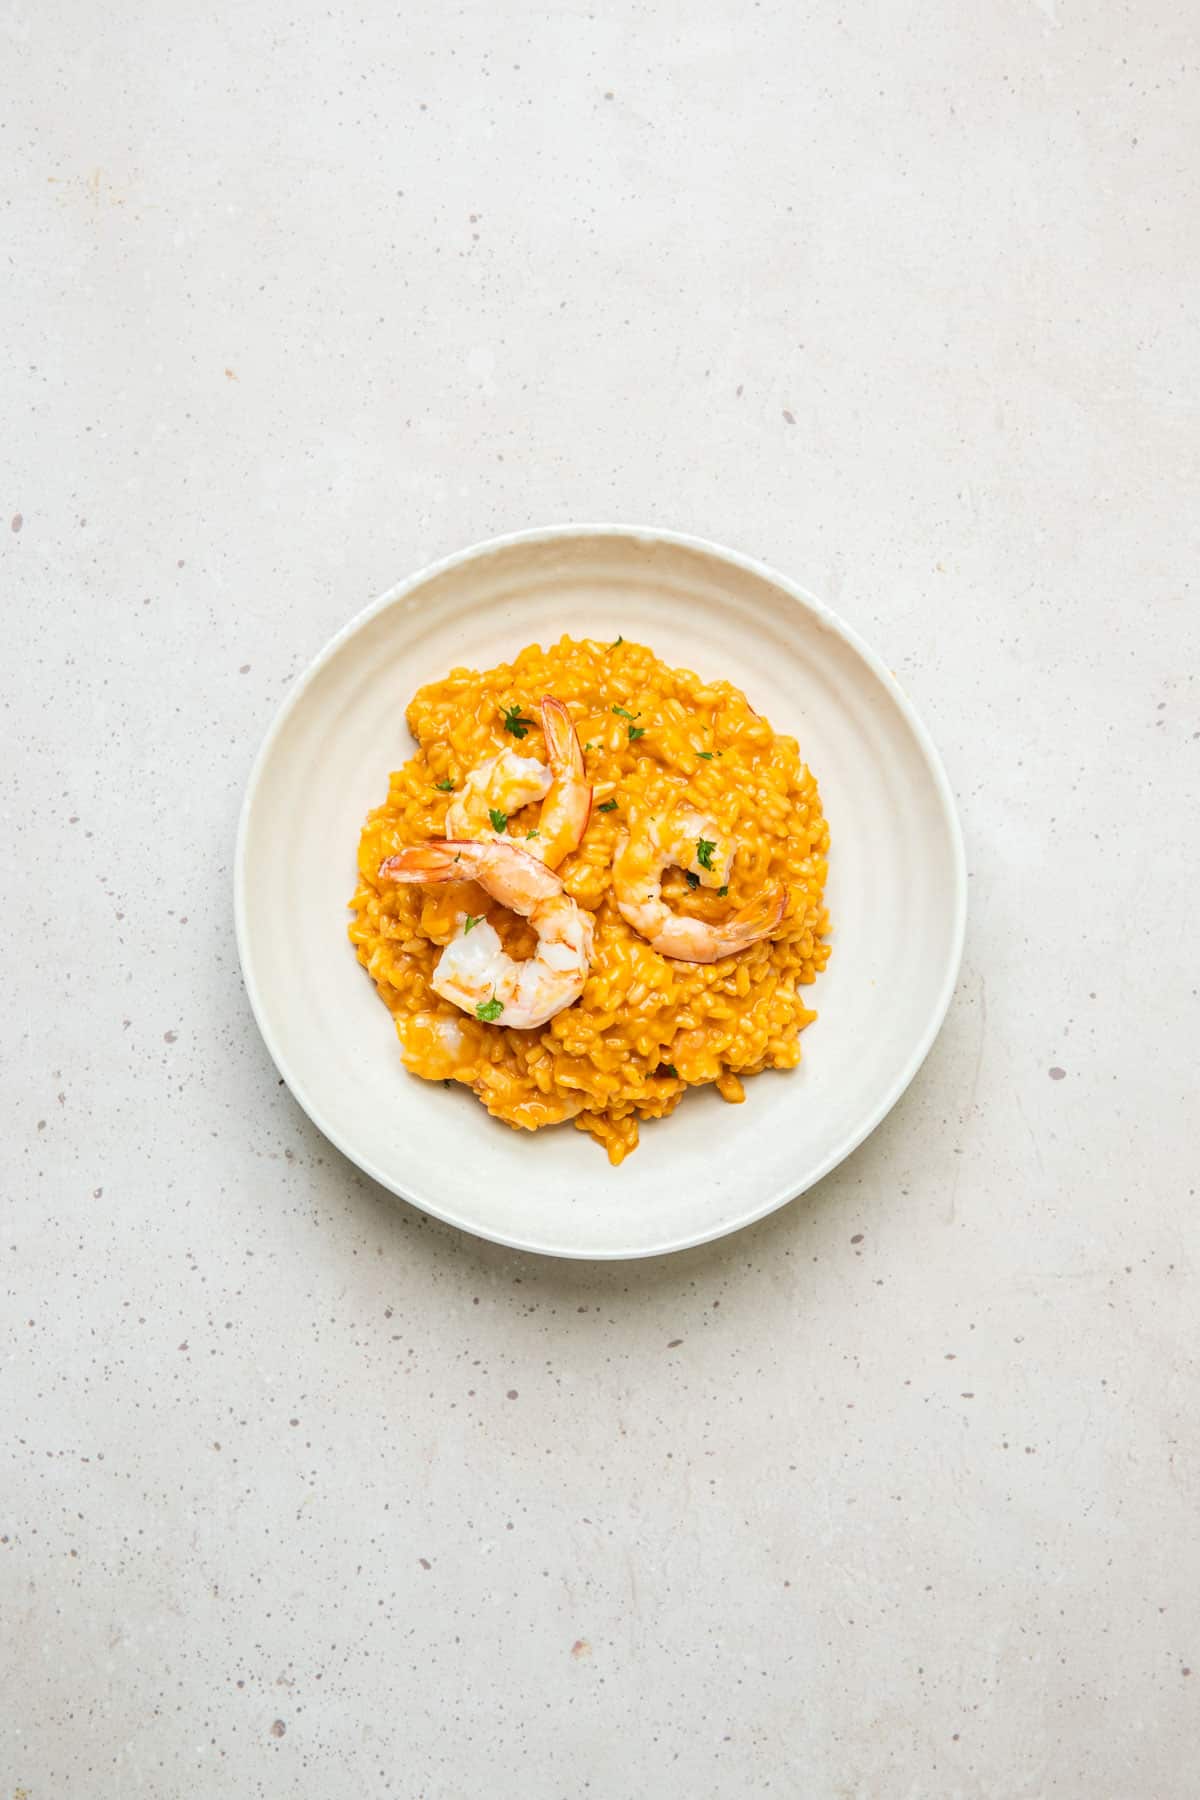 a bowl of risotto on a table.